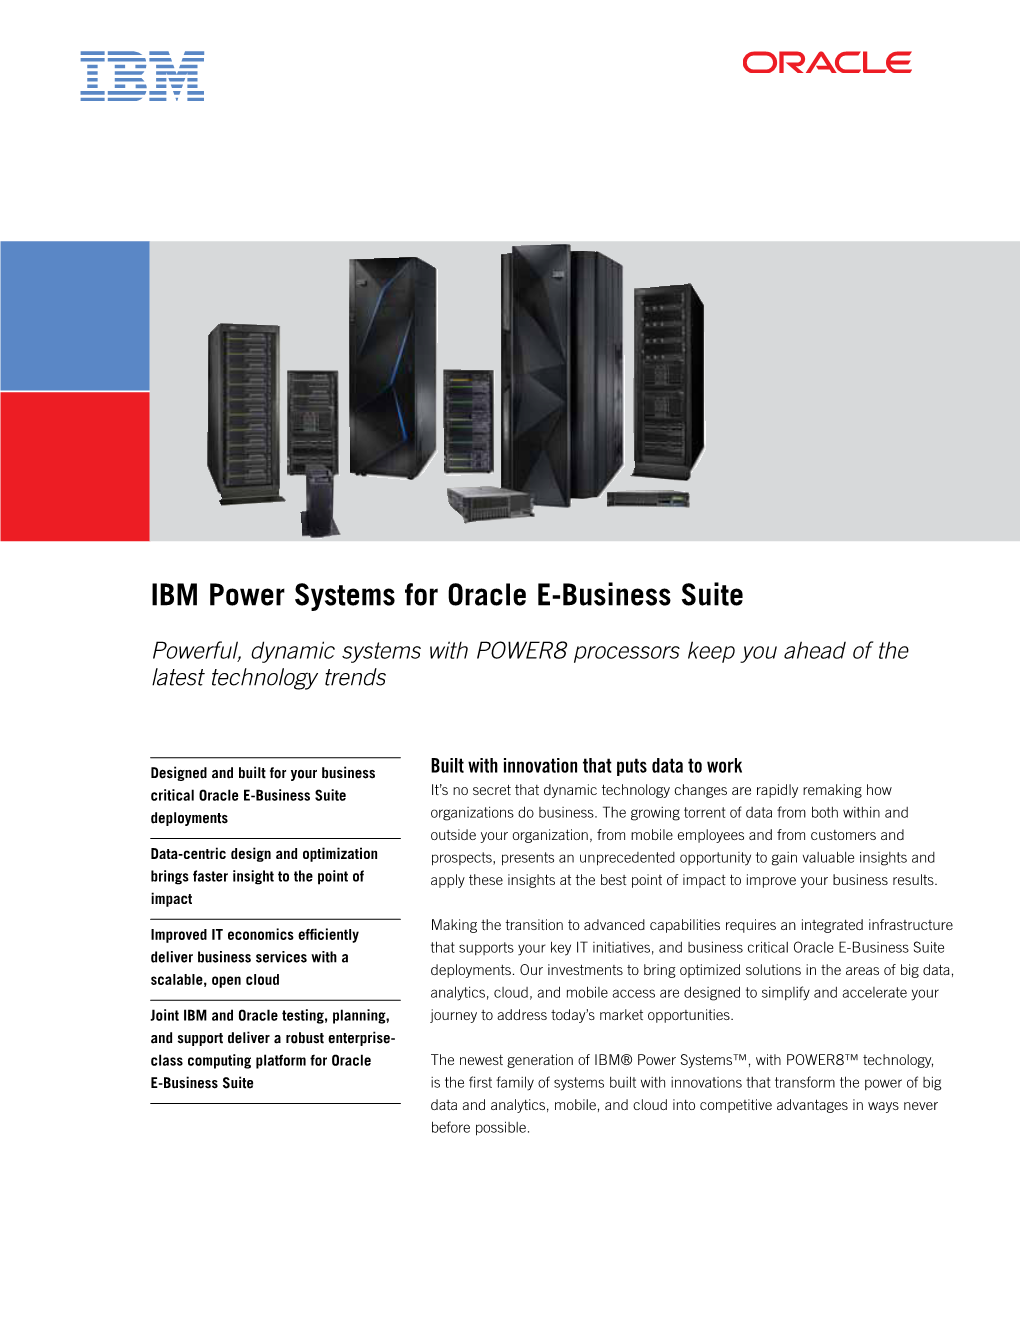 IBM Power Systems for Oracle E-Business Suite